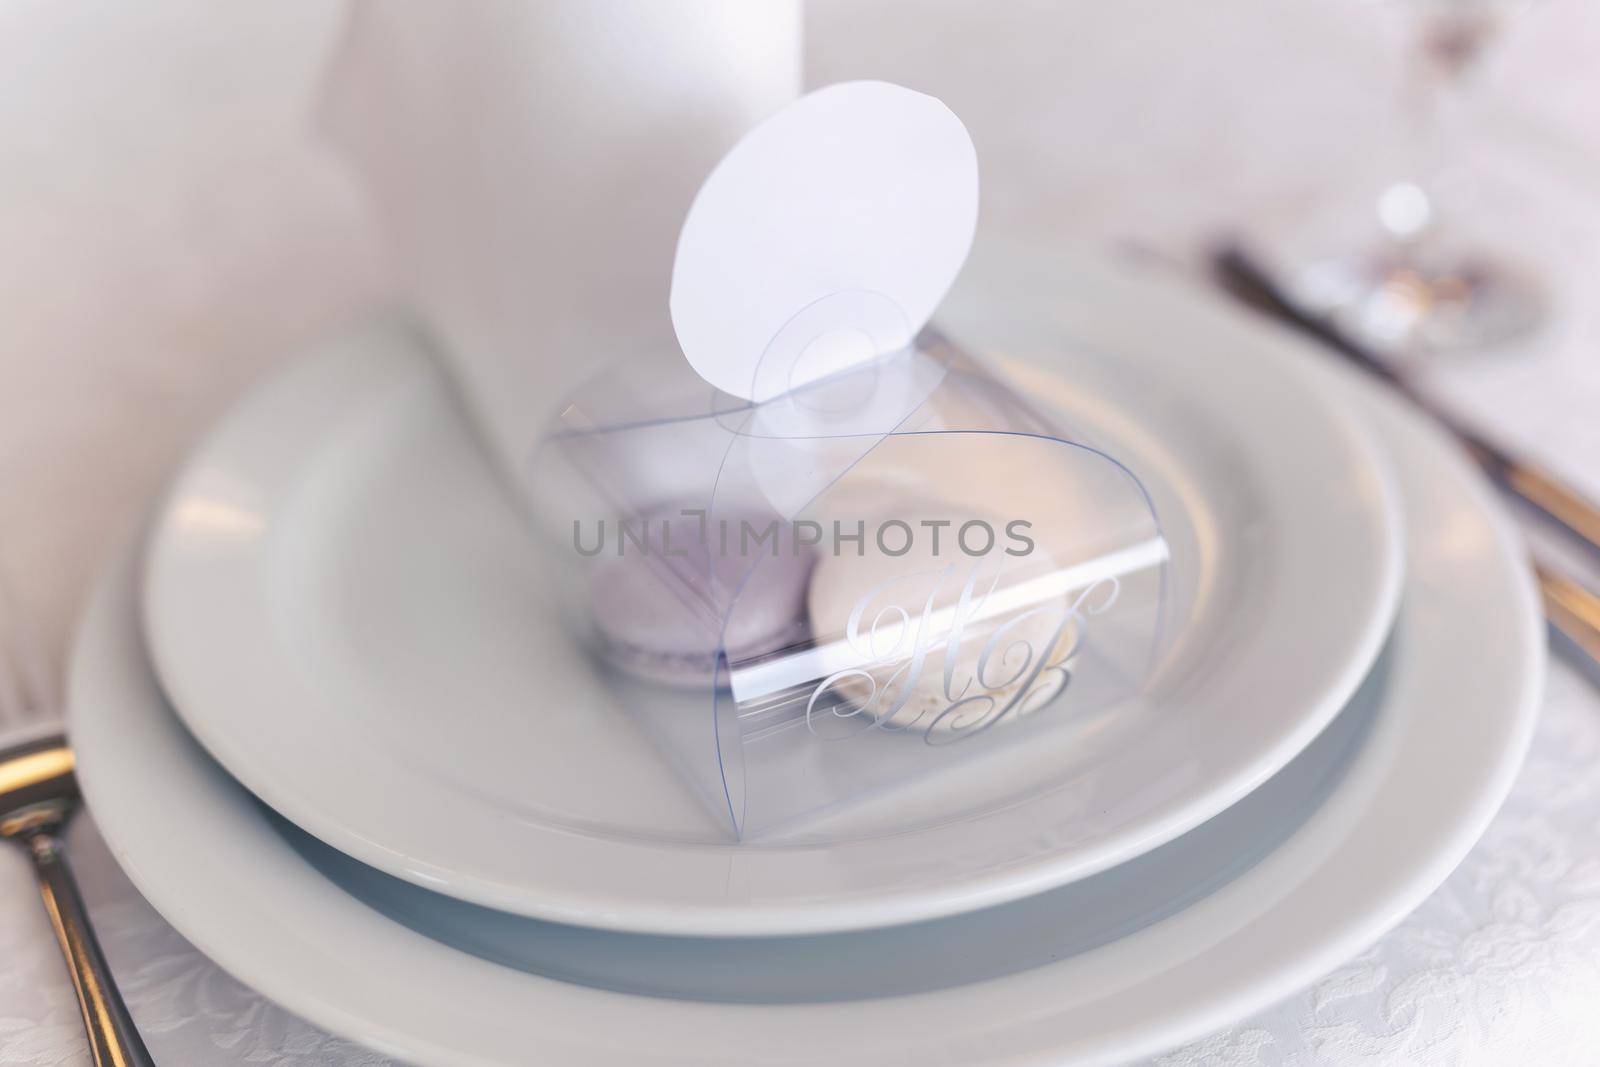 Serving a wedding banquet table in a restaurant with initials, name and date by StudioPeace